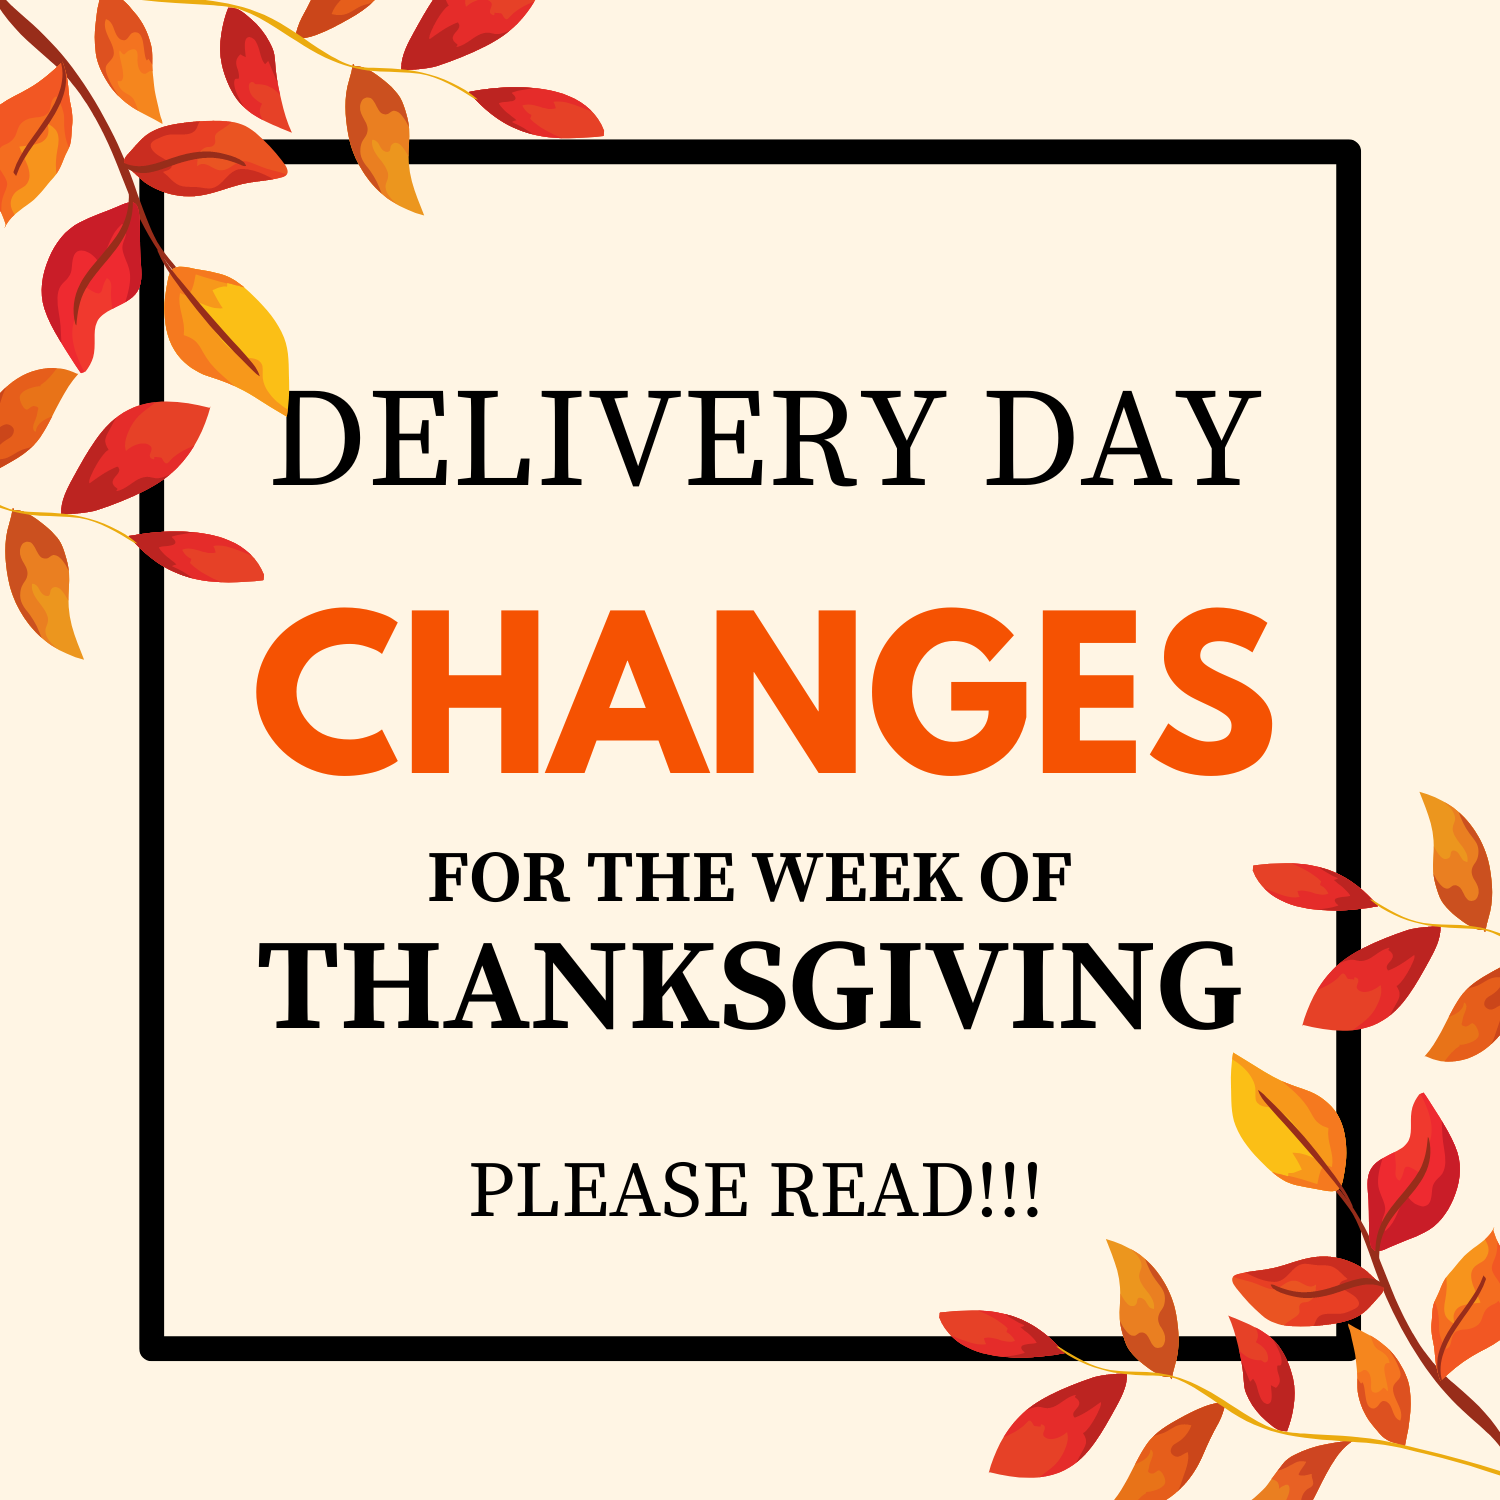 Next Happening: ATTENTION: Delivery Day Changes for Week of Thanksgiving